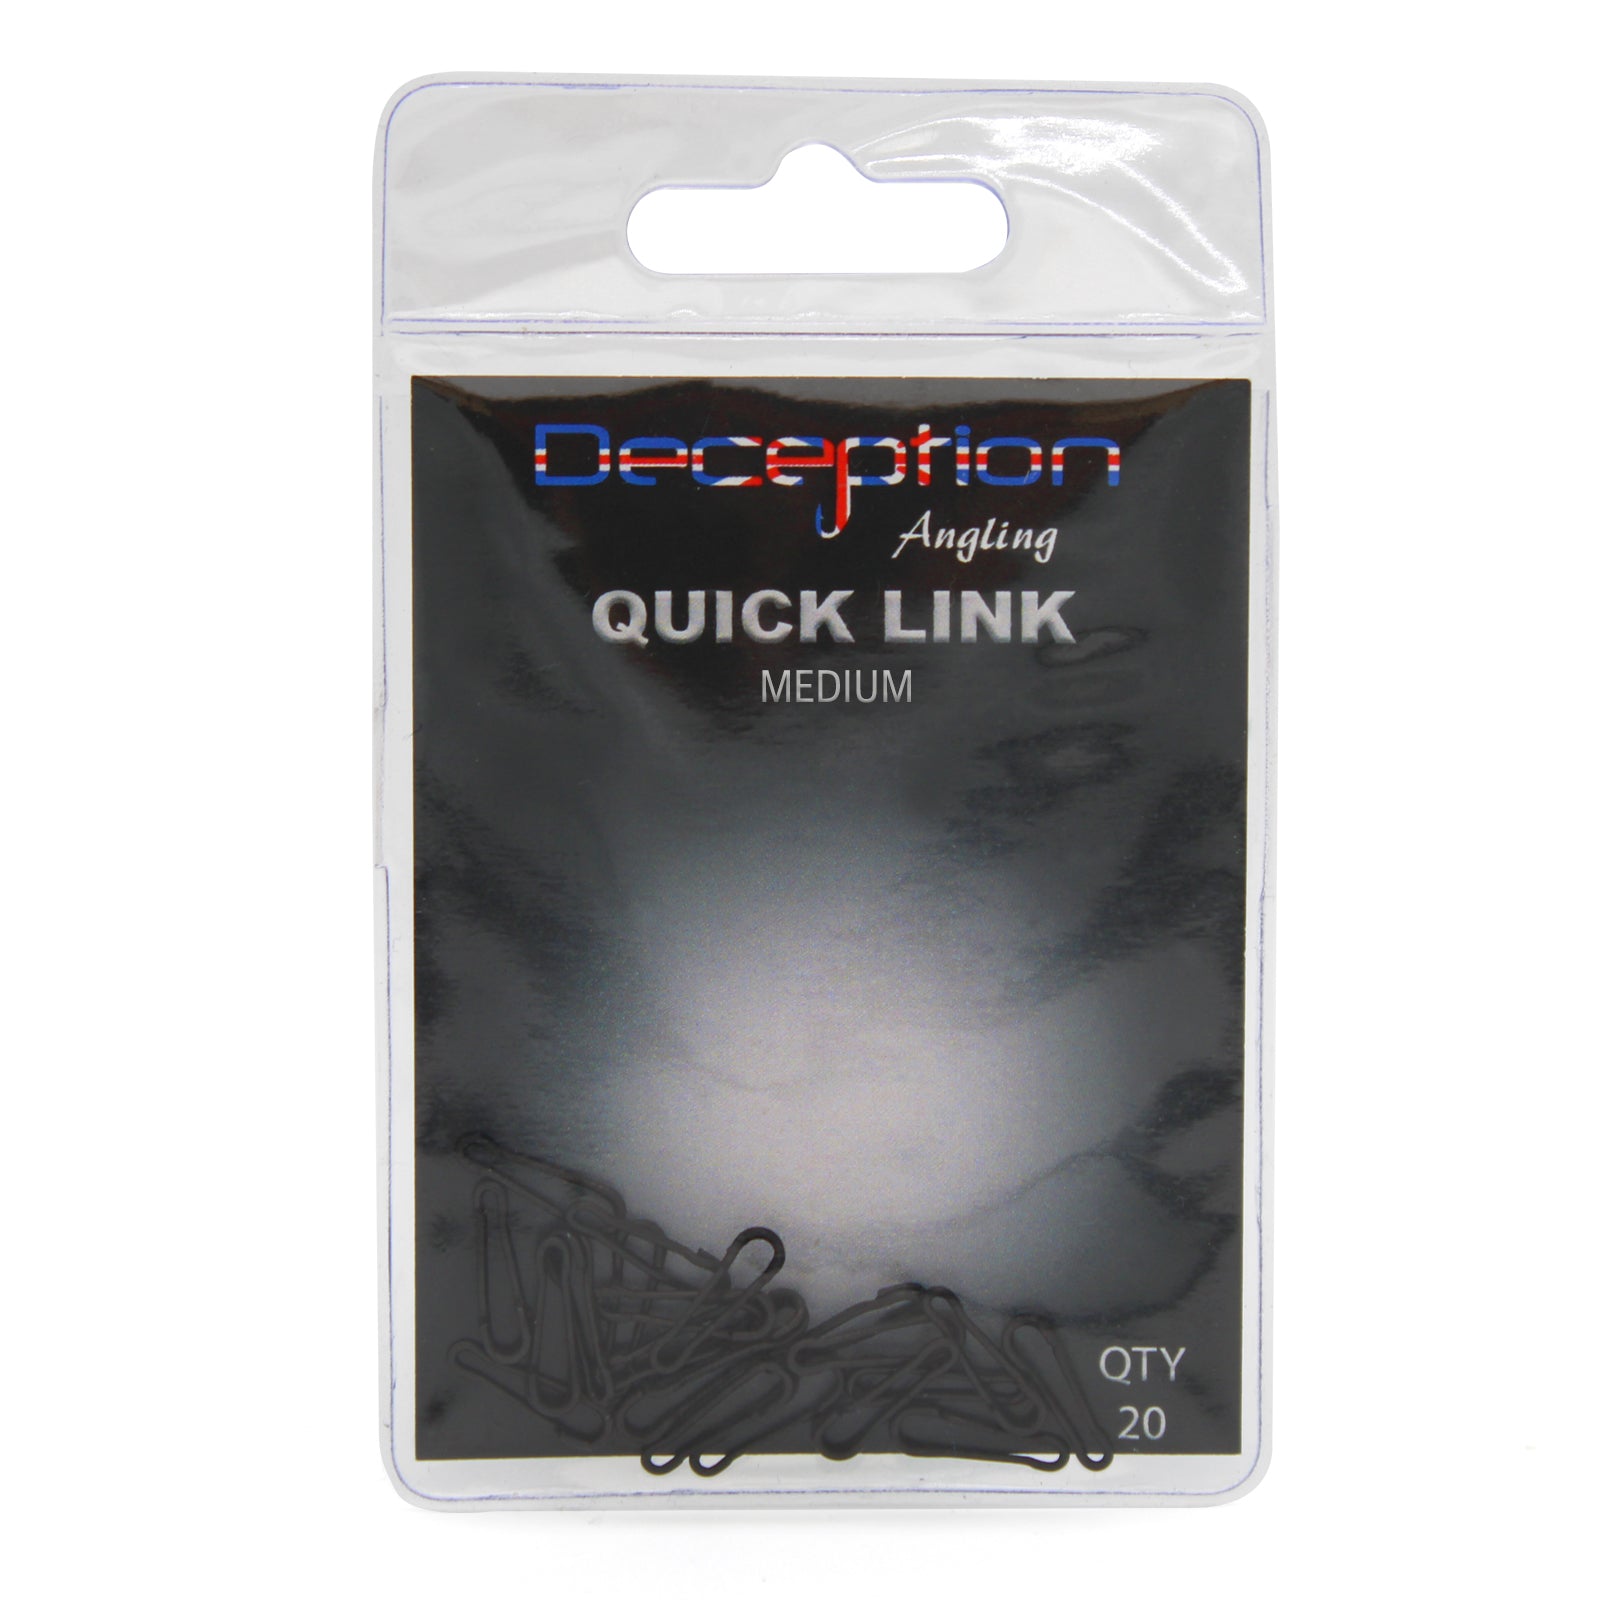 Deception Angling Quick Link Medium for Fishing